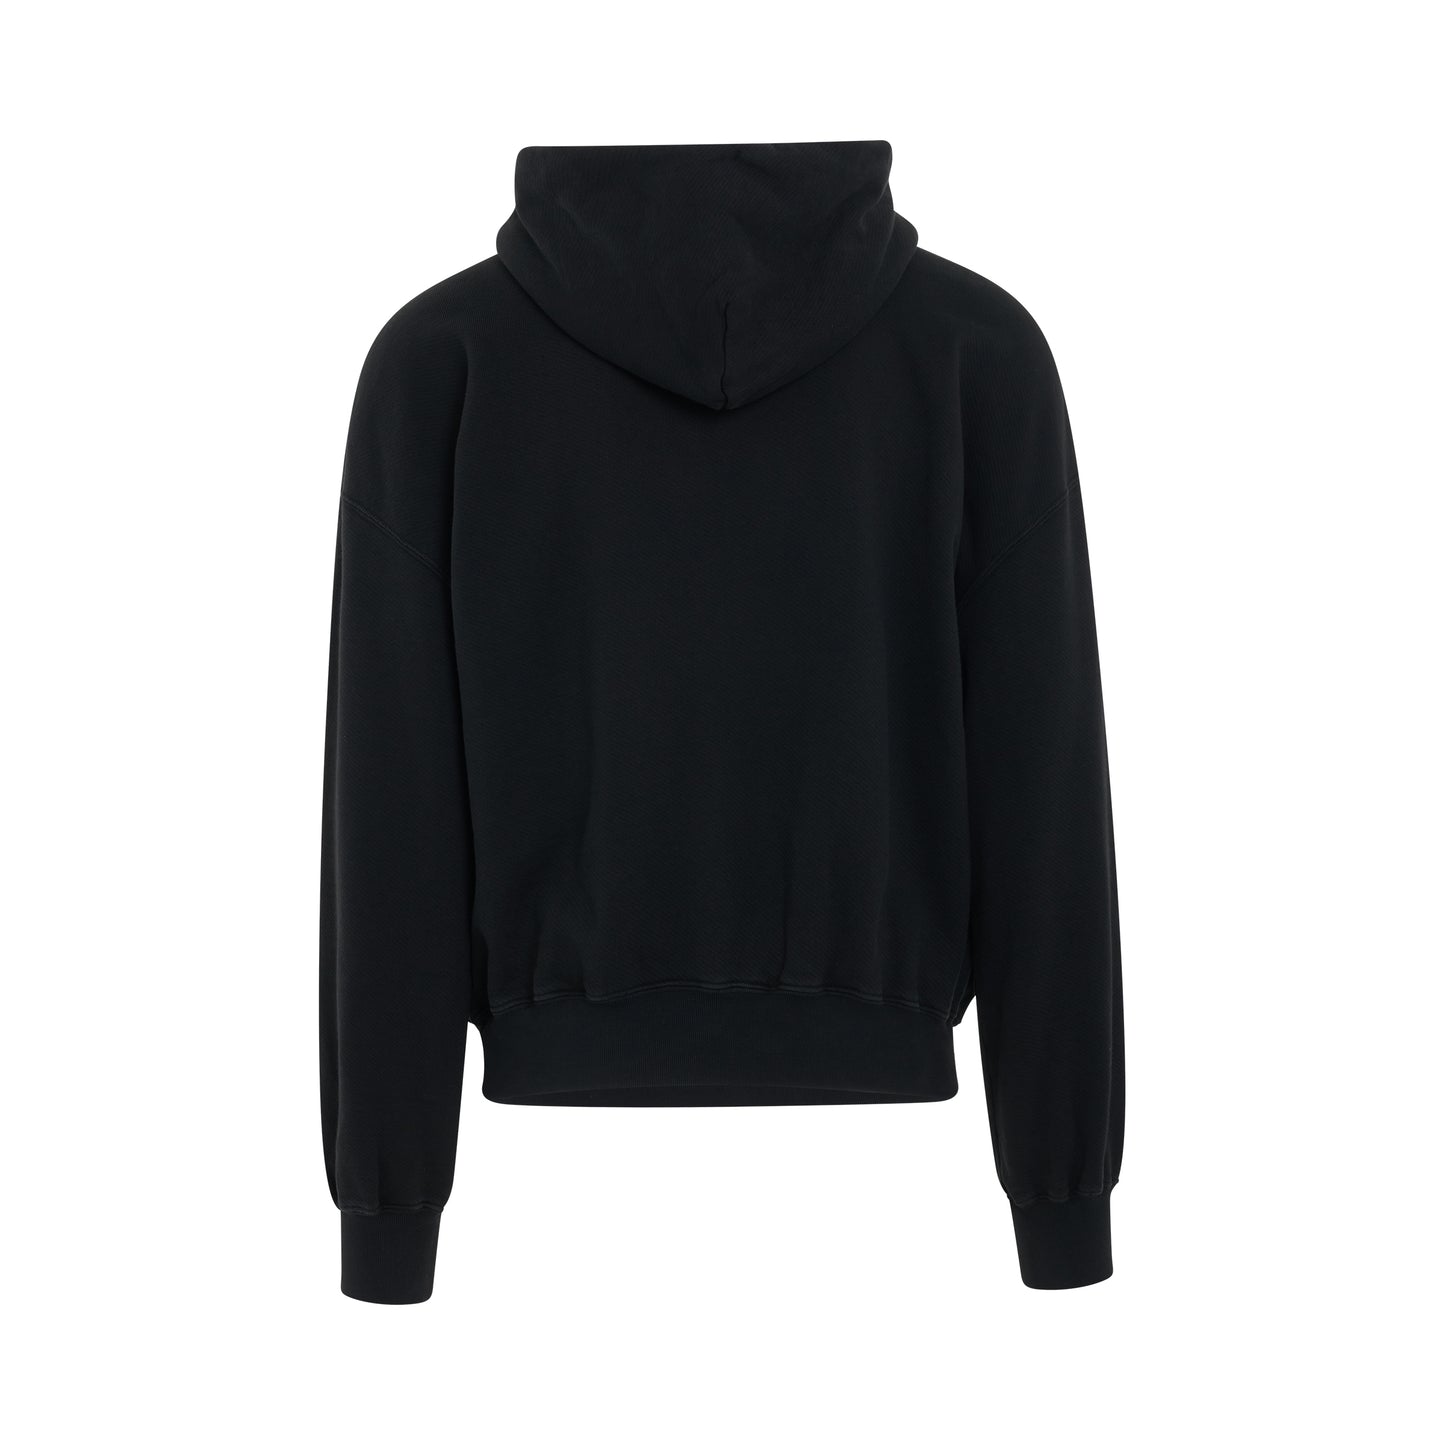 Bookish Laundry Boxy Hoodie in Black